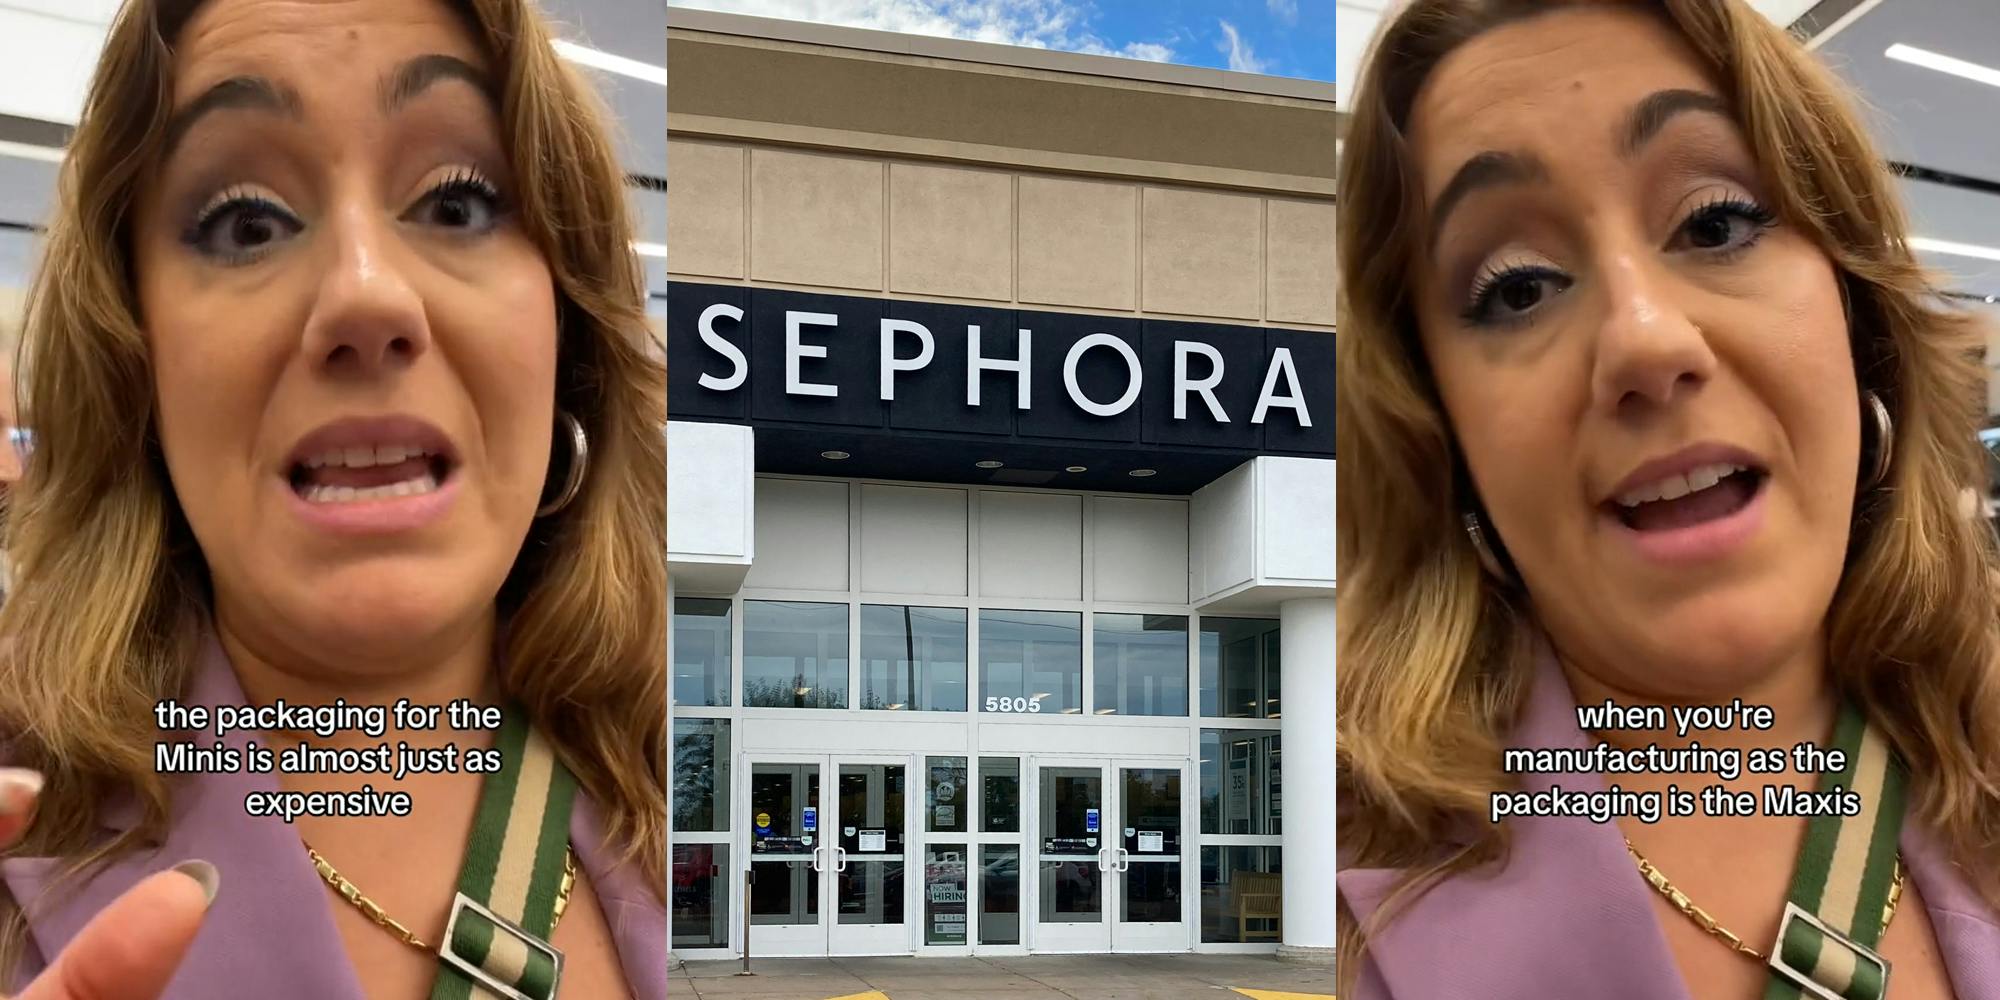 Sephora customer speaking with caption "the packaging for the Minis is almost just as expensive" (l) Sephora building with sign (c) Sephora customer speaking with caption "when you're manufacturing as the packaging for the Maxis" (r)